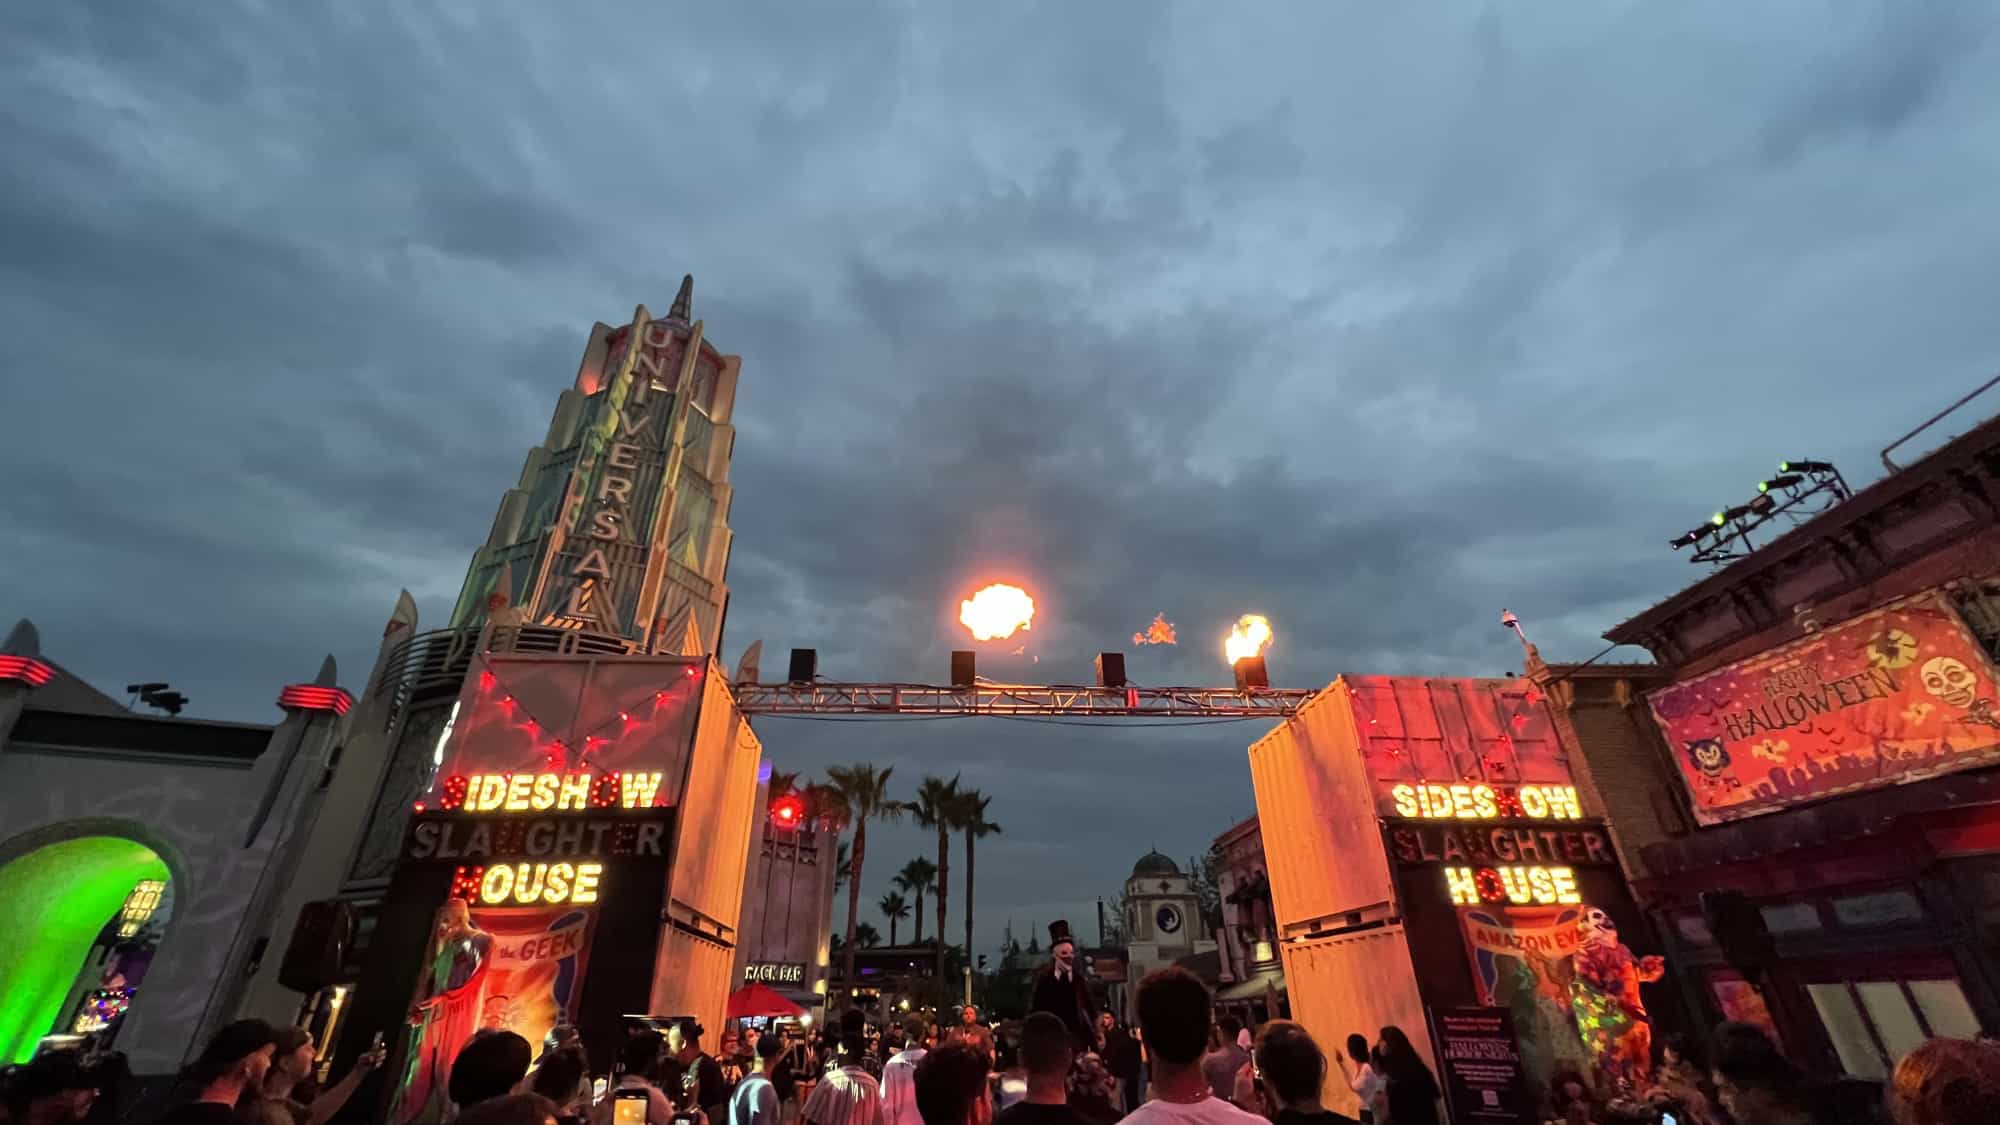 Halloween Horror Nights 2023: Guide to Evil Dead Rise & New Houses